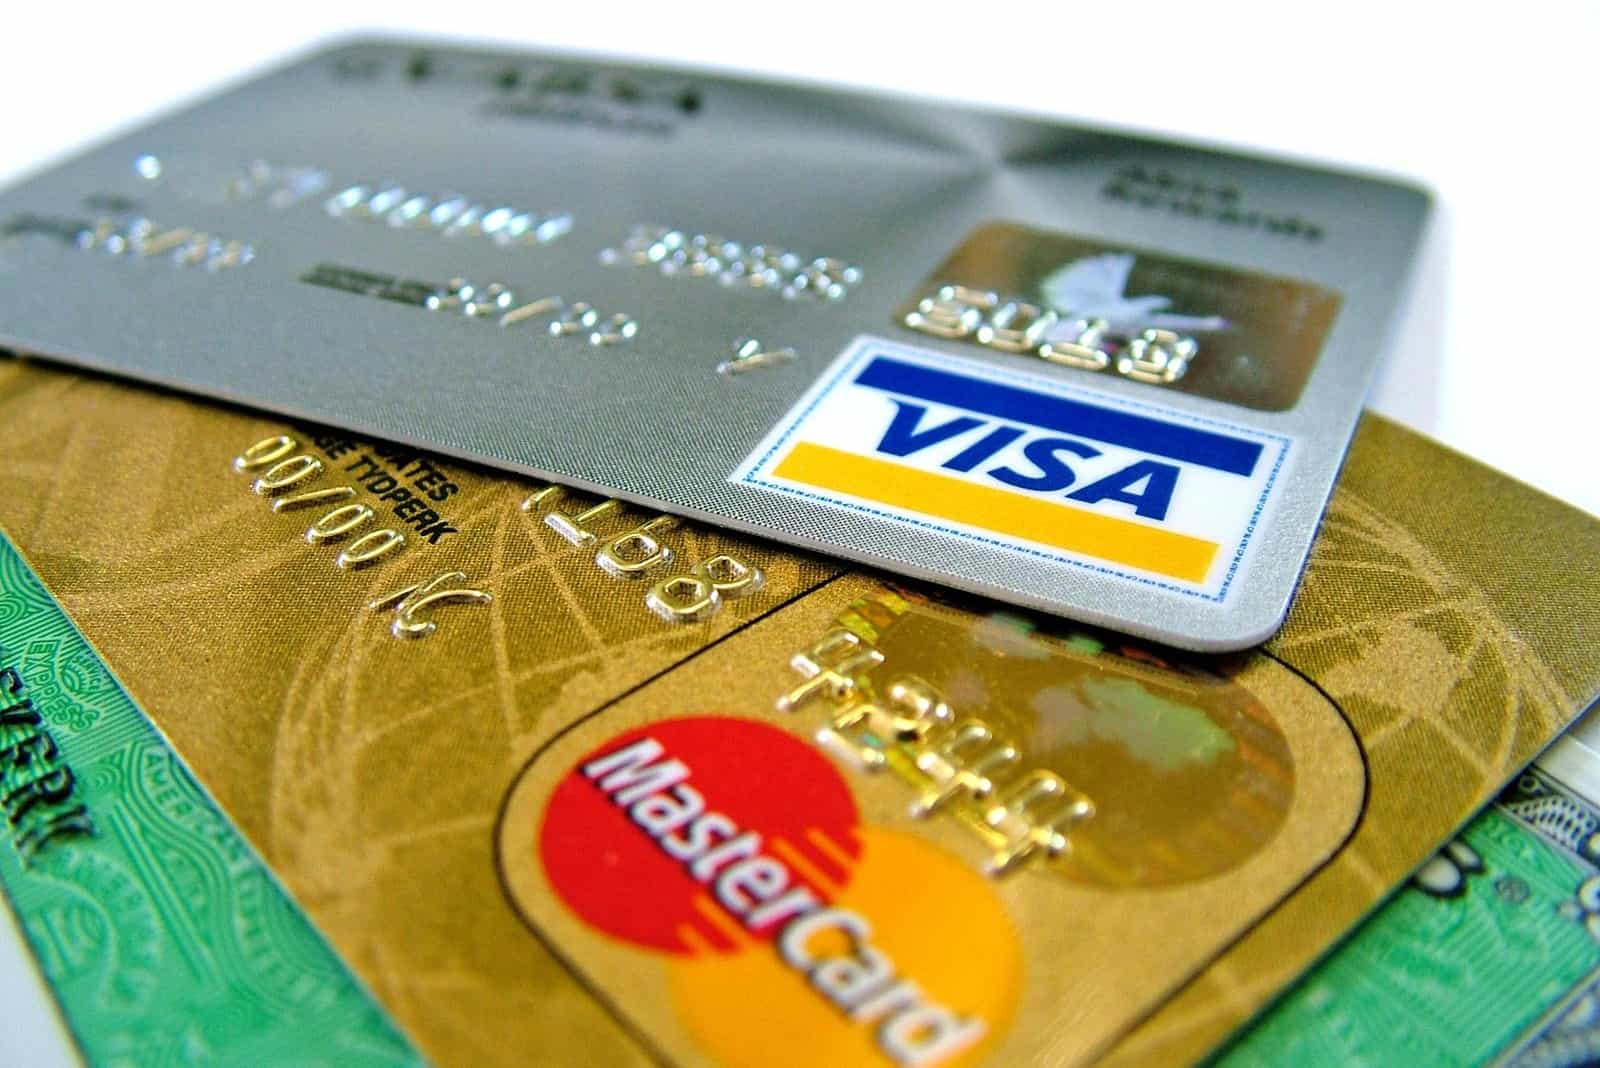 Things to Know Before Applying for a Credit Card